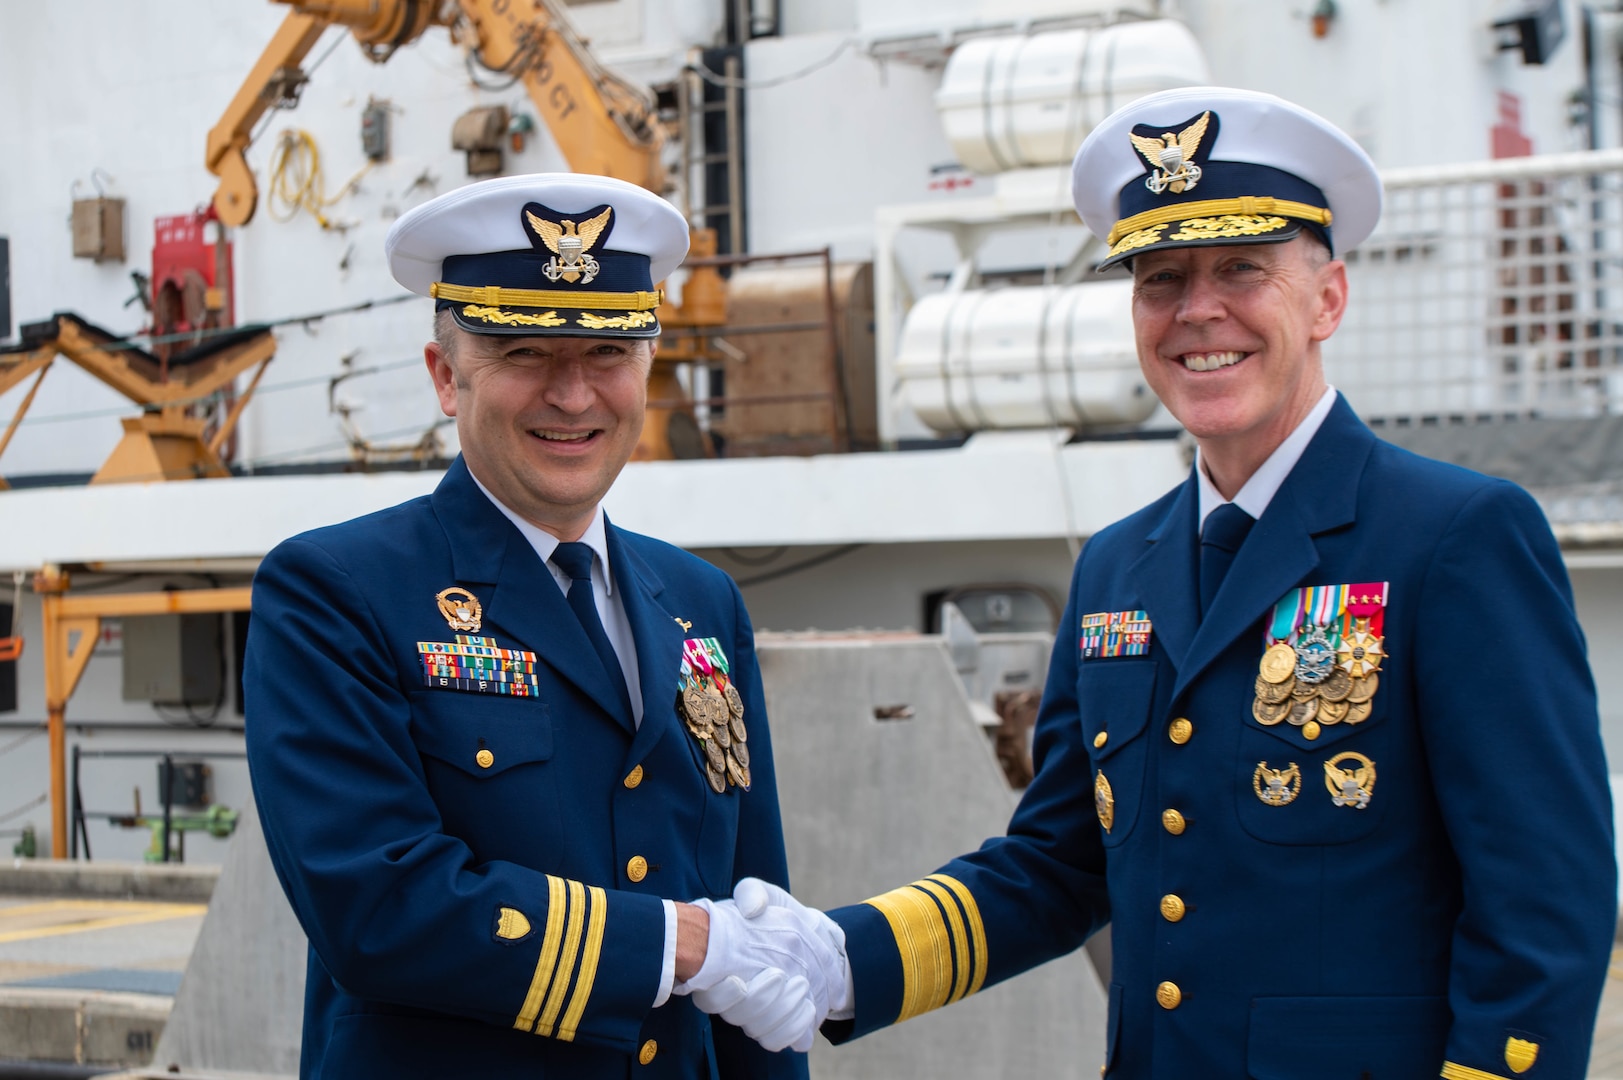 Vice Adm. Kevin Lunday, commander, Coast Guard Atlantic Area (right), shakes hands with Cmdr. Aaron W. Delano-Johnson, commanding officer of Coast Guard Cutter Decisive (left), during the Decisive’s decommissioning ceremony at Pensacola, Florida, March 2, 2023. Decisive is the third Coast Guard 210-foot, Reliance-class medium endurance cutter to be decommissioned since 2001 as part of modernization efforts across the fleet. (U.S. Coast Guard photo by Petty Officer 2nd Class Jose Hernandez)